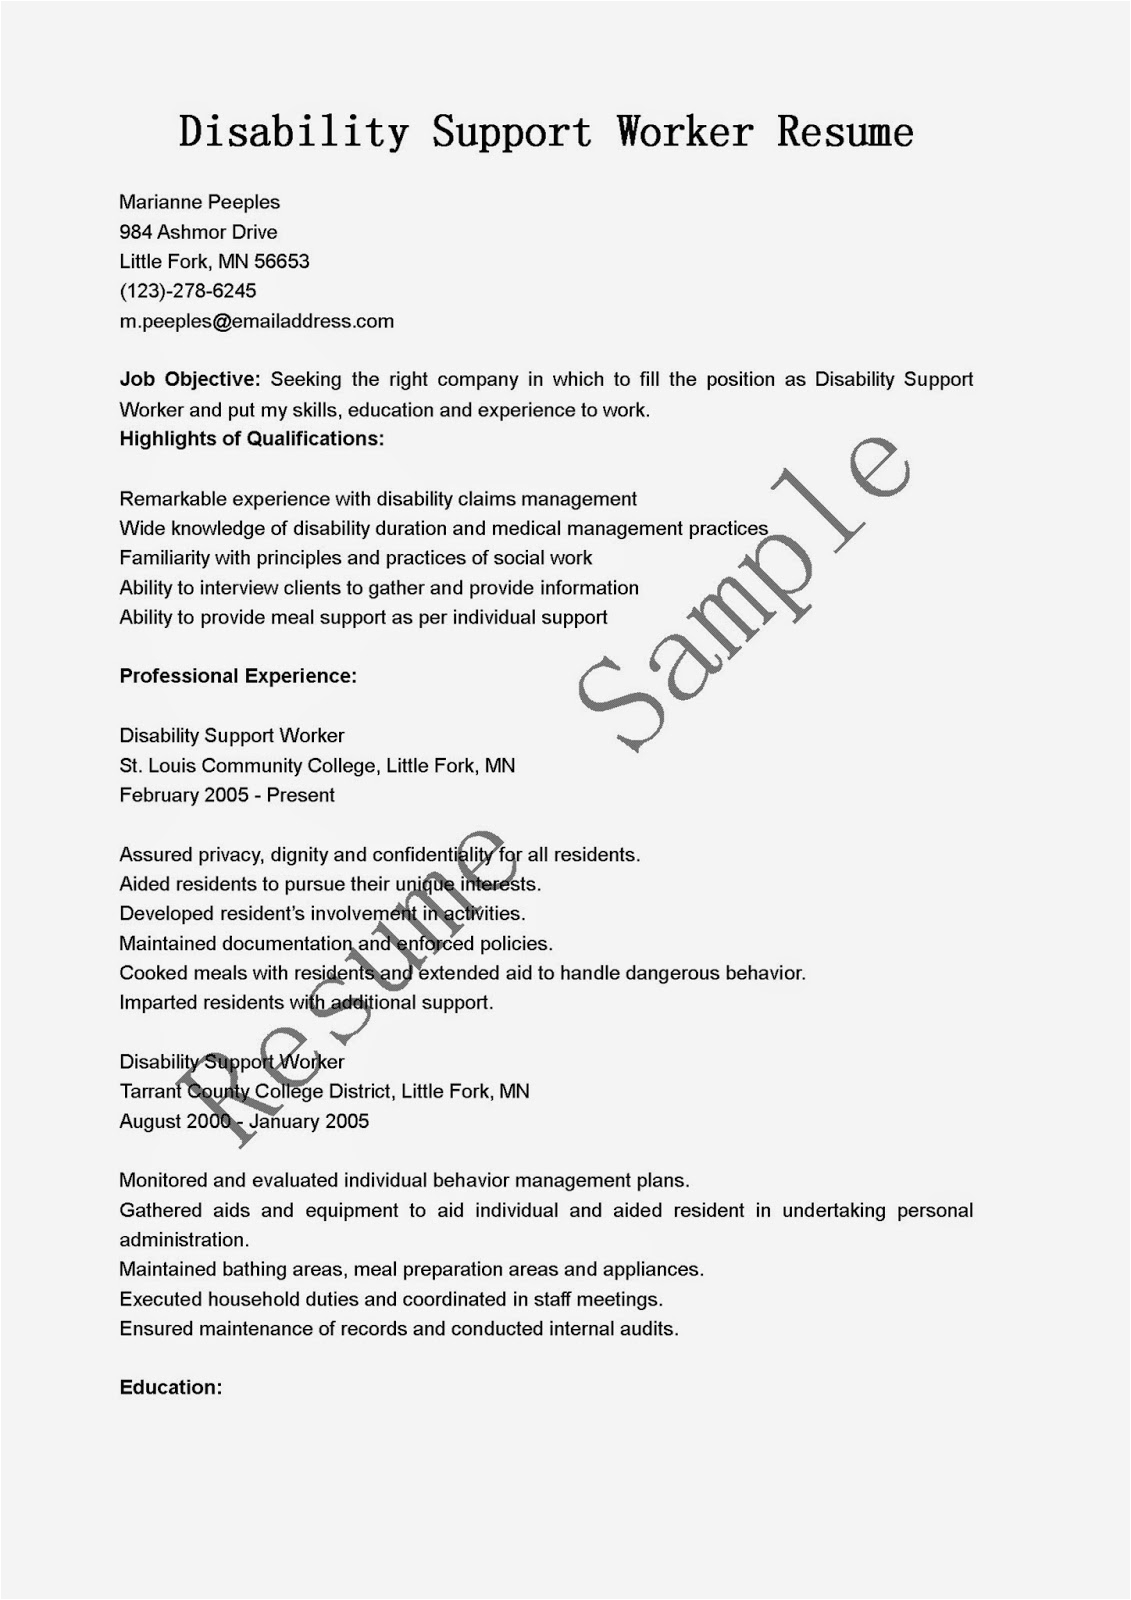 Sample Resume Of Disability Care Worker Resume Samples Disability Support Worker Resume Sample